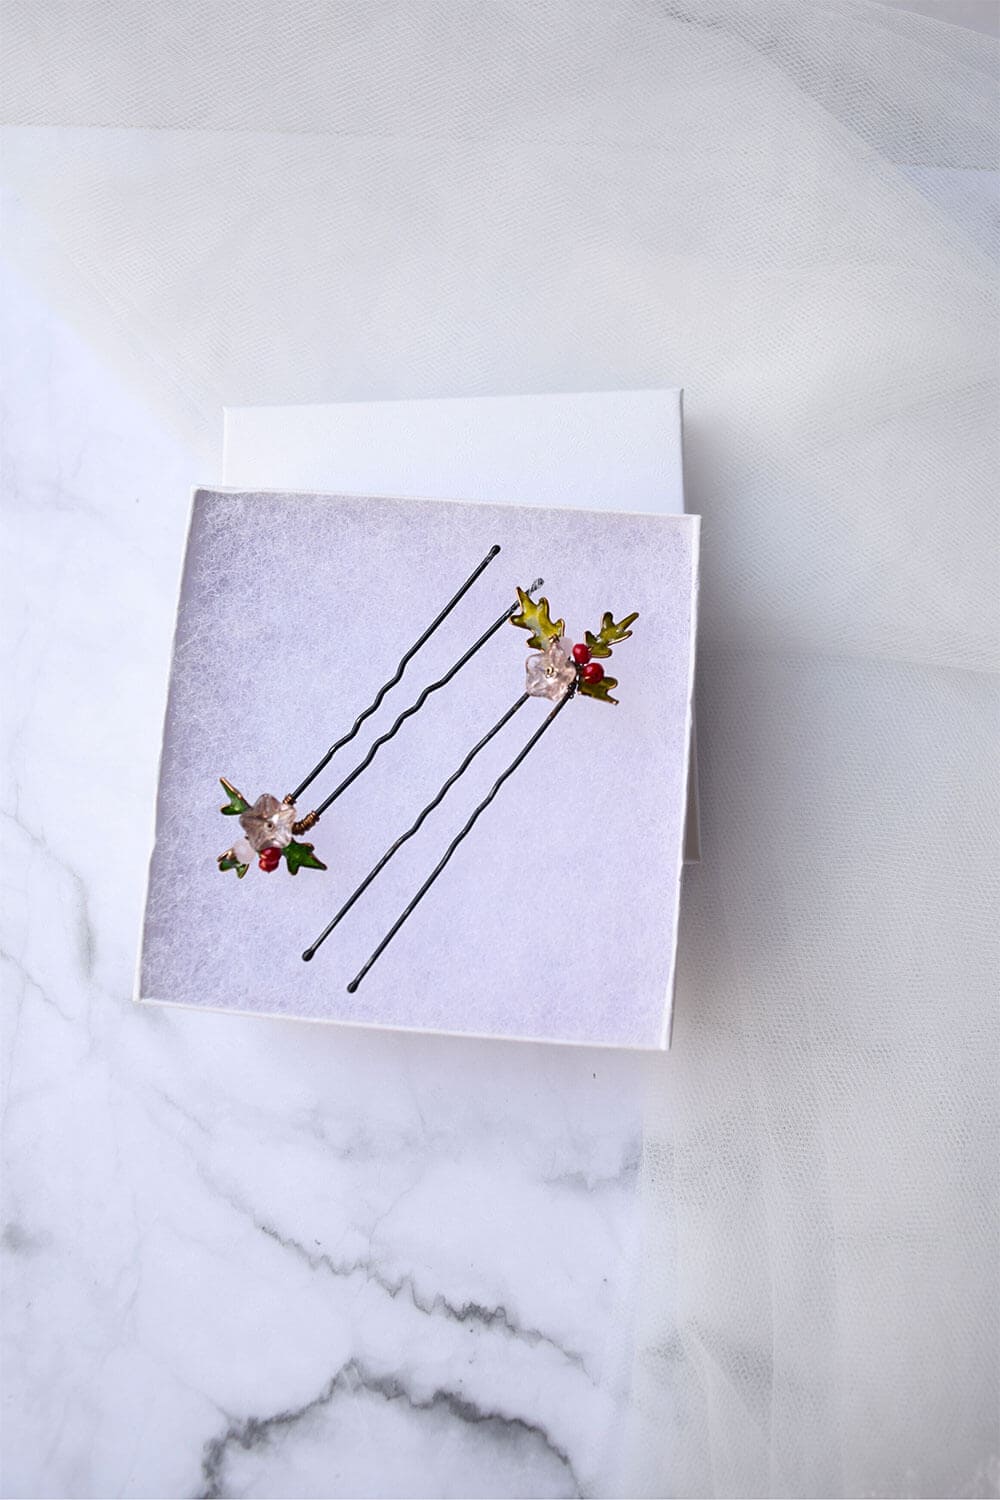 Holly Faux or Cherry leaves hair forks for Christmas